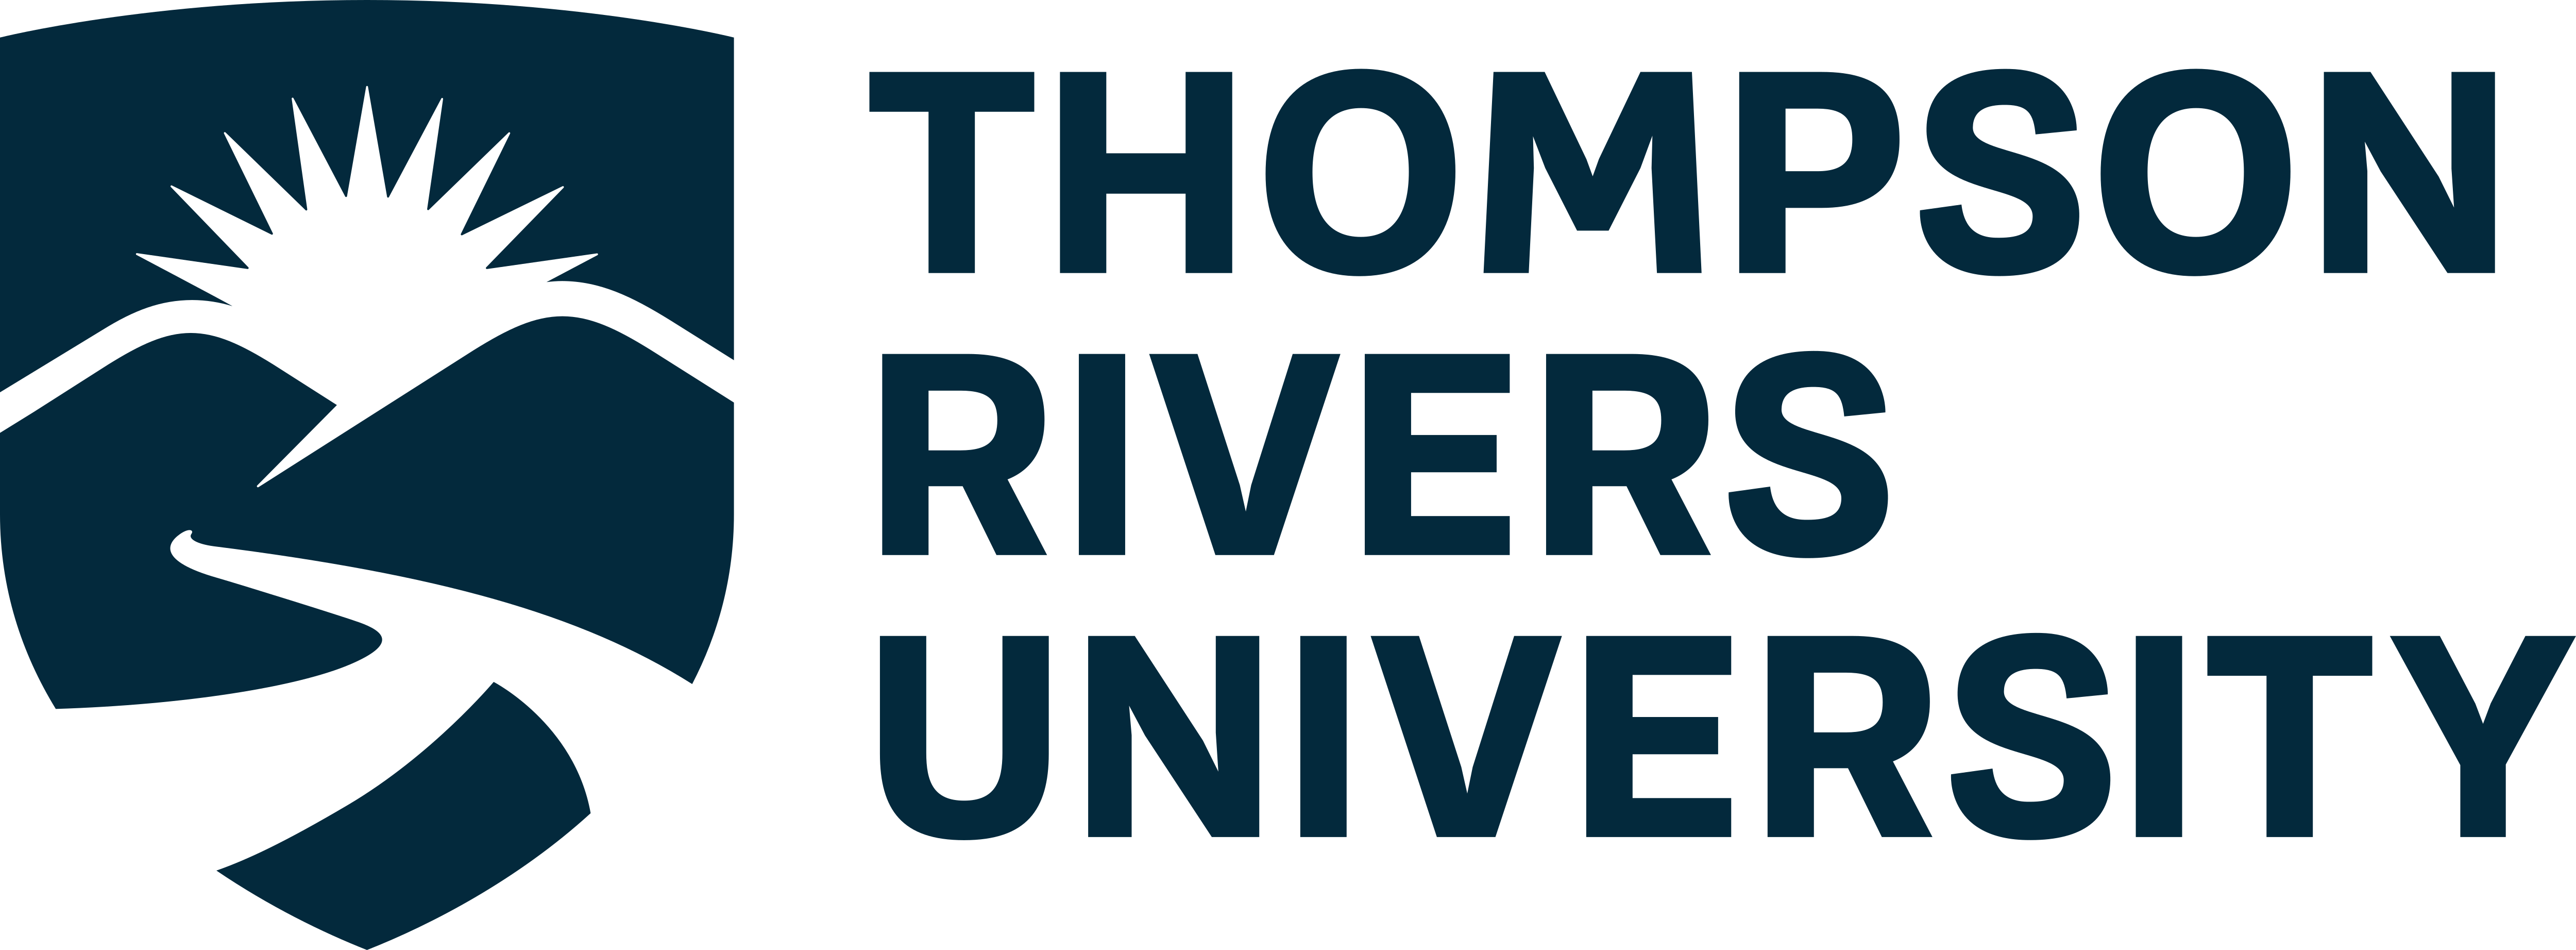 Software Engineering | Bachelor's degree | Computer Science & IT | On Campus | Thompson Rivers University | Canada